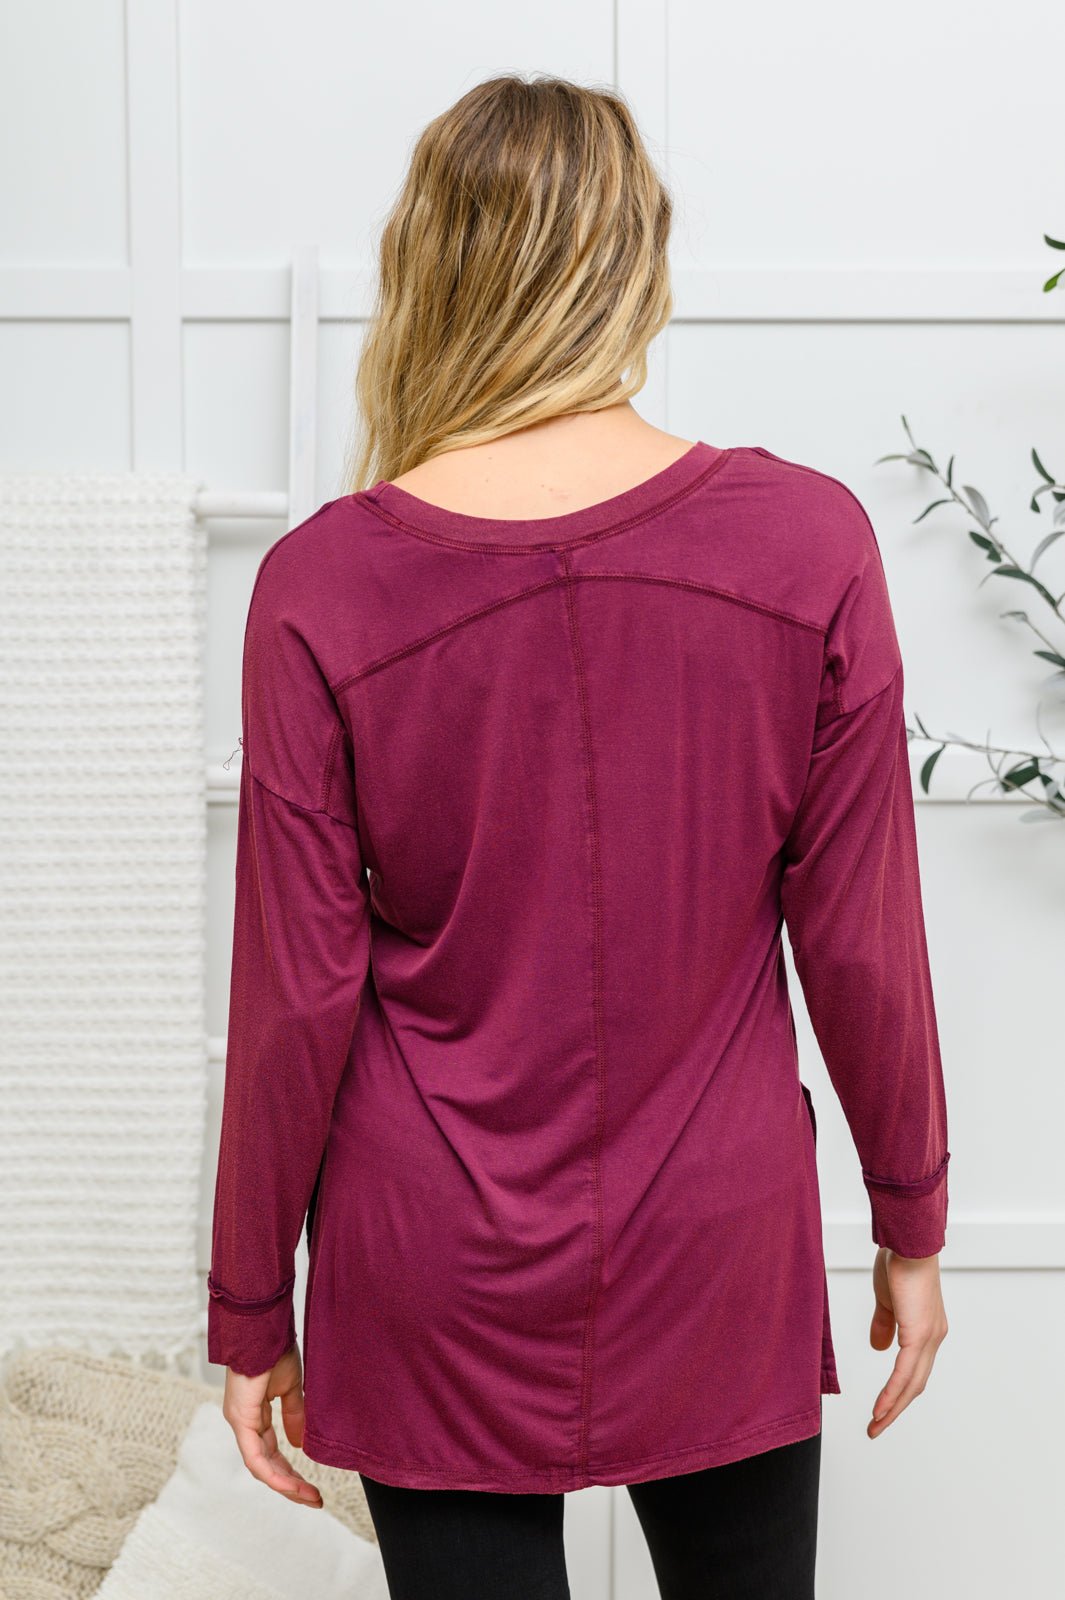 Long Sleeve Knit Top With Pocket In Burgundy - Happily Ever Atchison Shop Co.